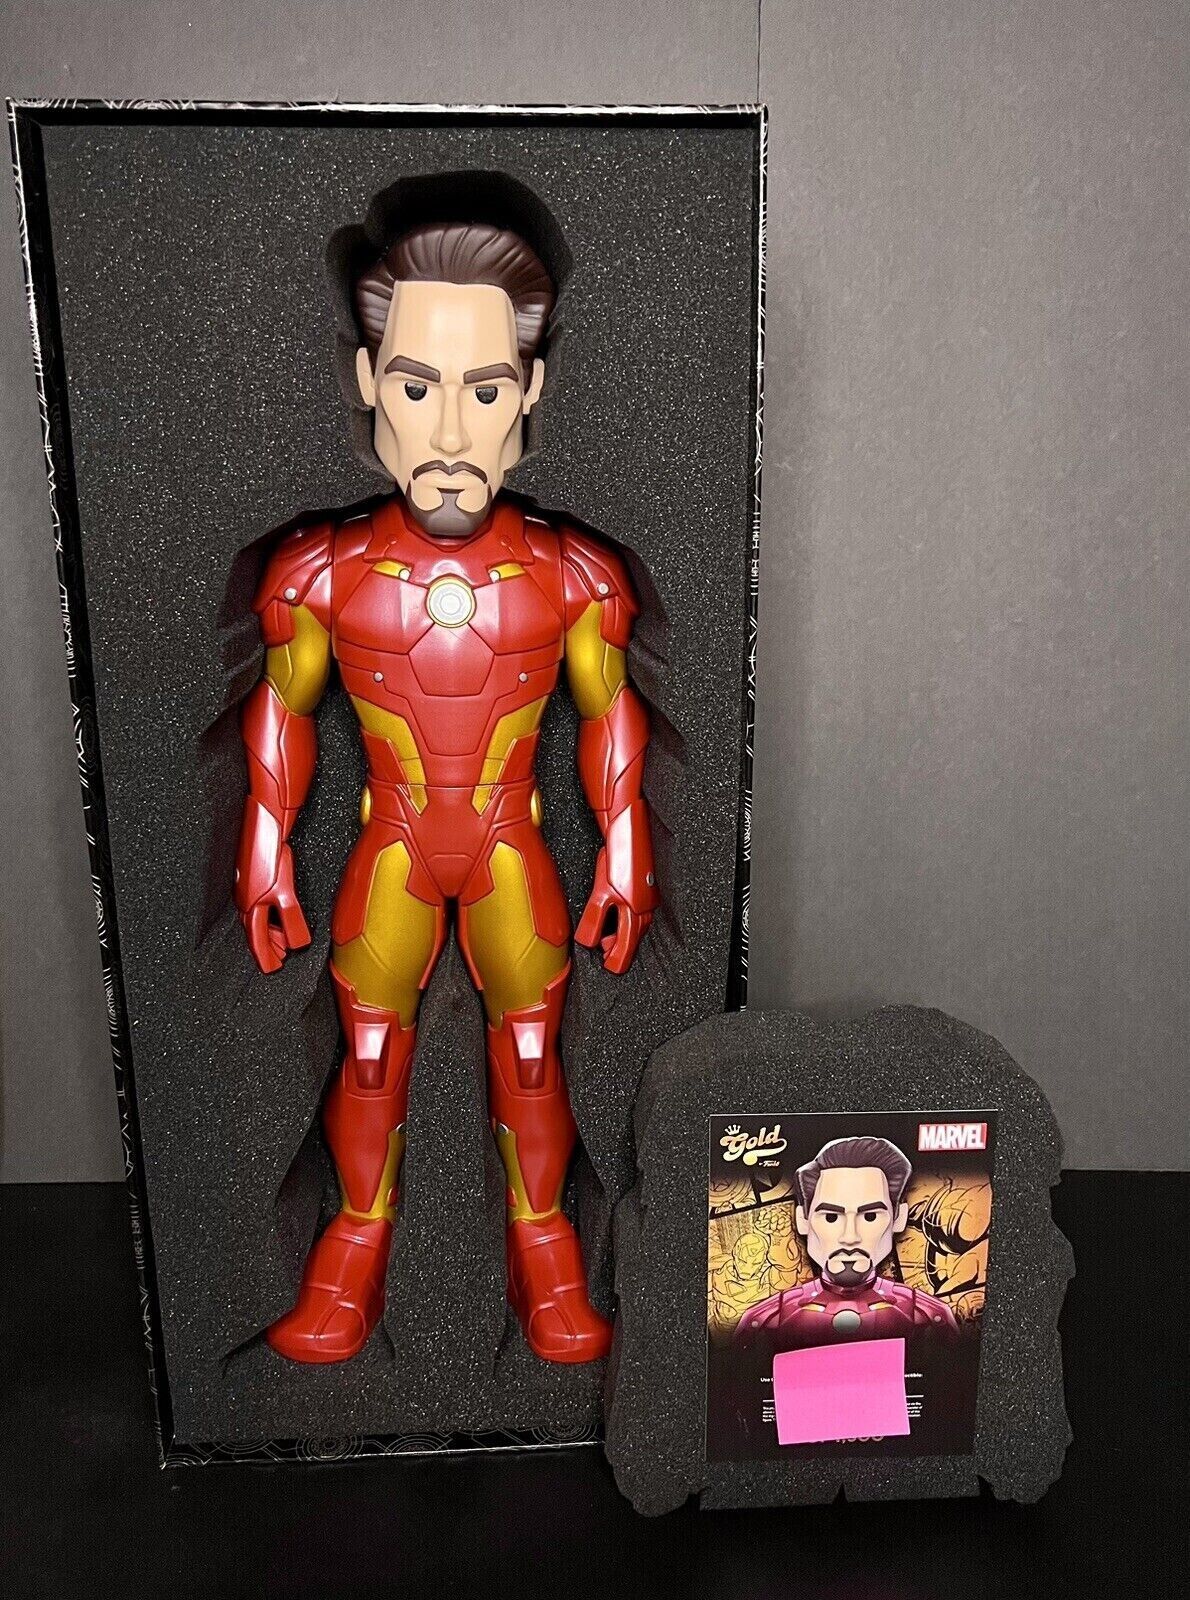 FUNKO GOLD MARVEL VEVE IRON MAN 18” VINYL FIGURE WITH CODE IN HAND LIMITED 3000